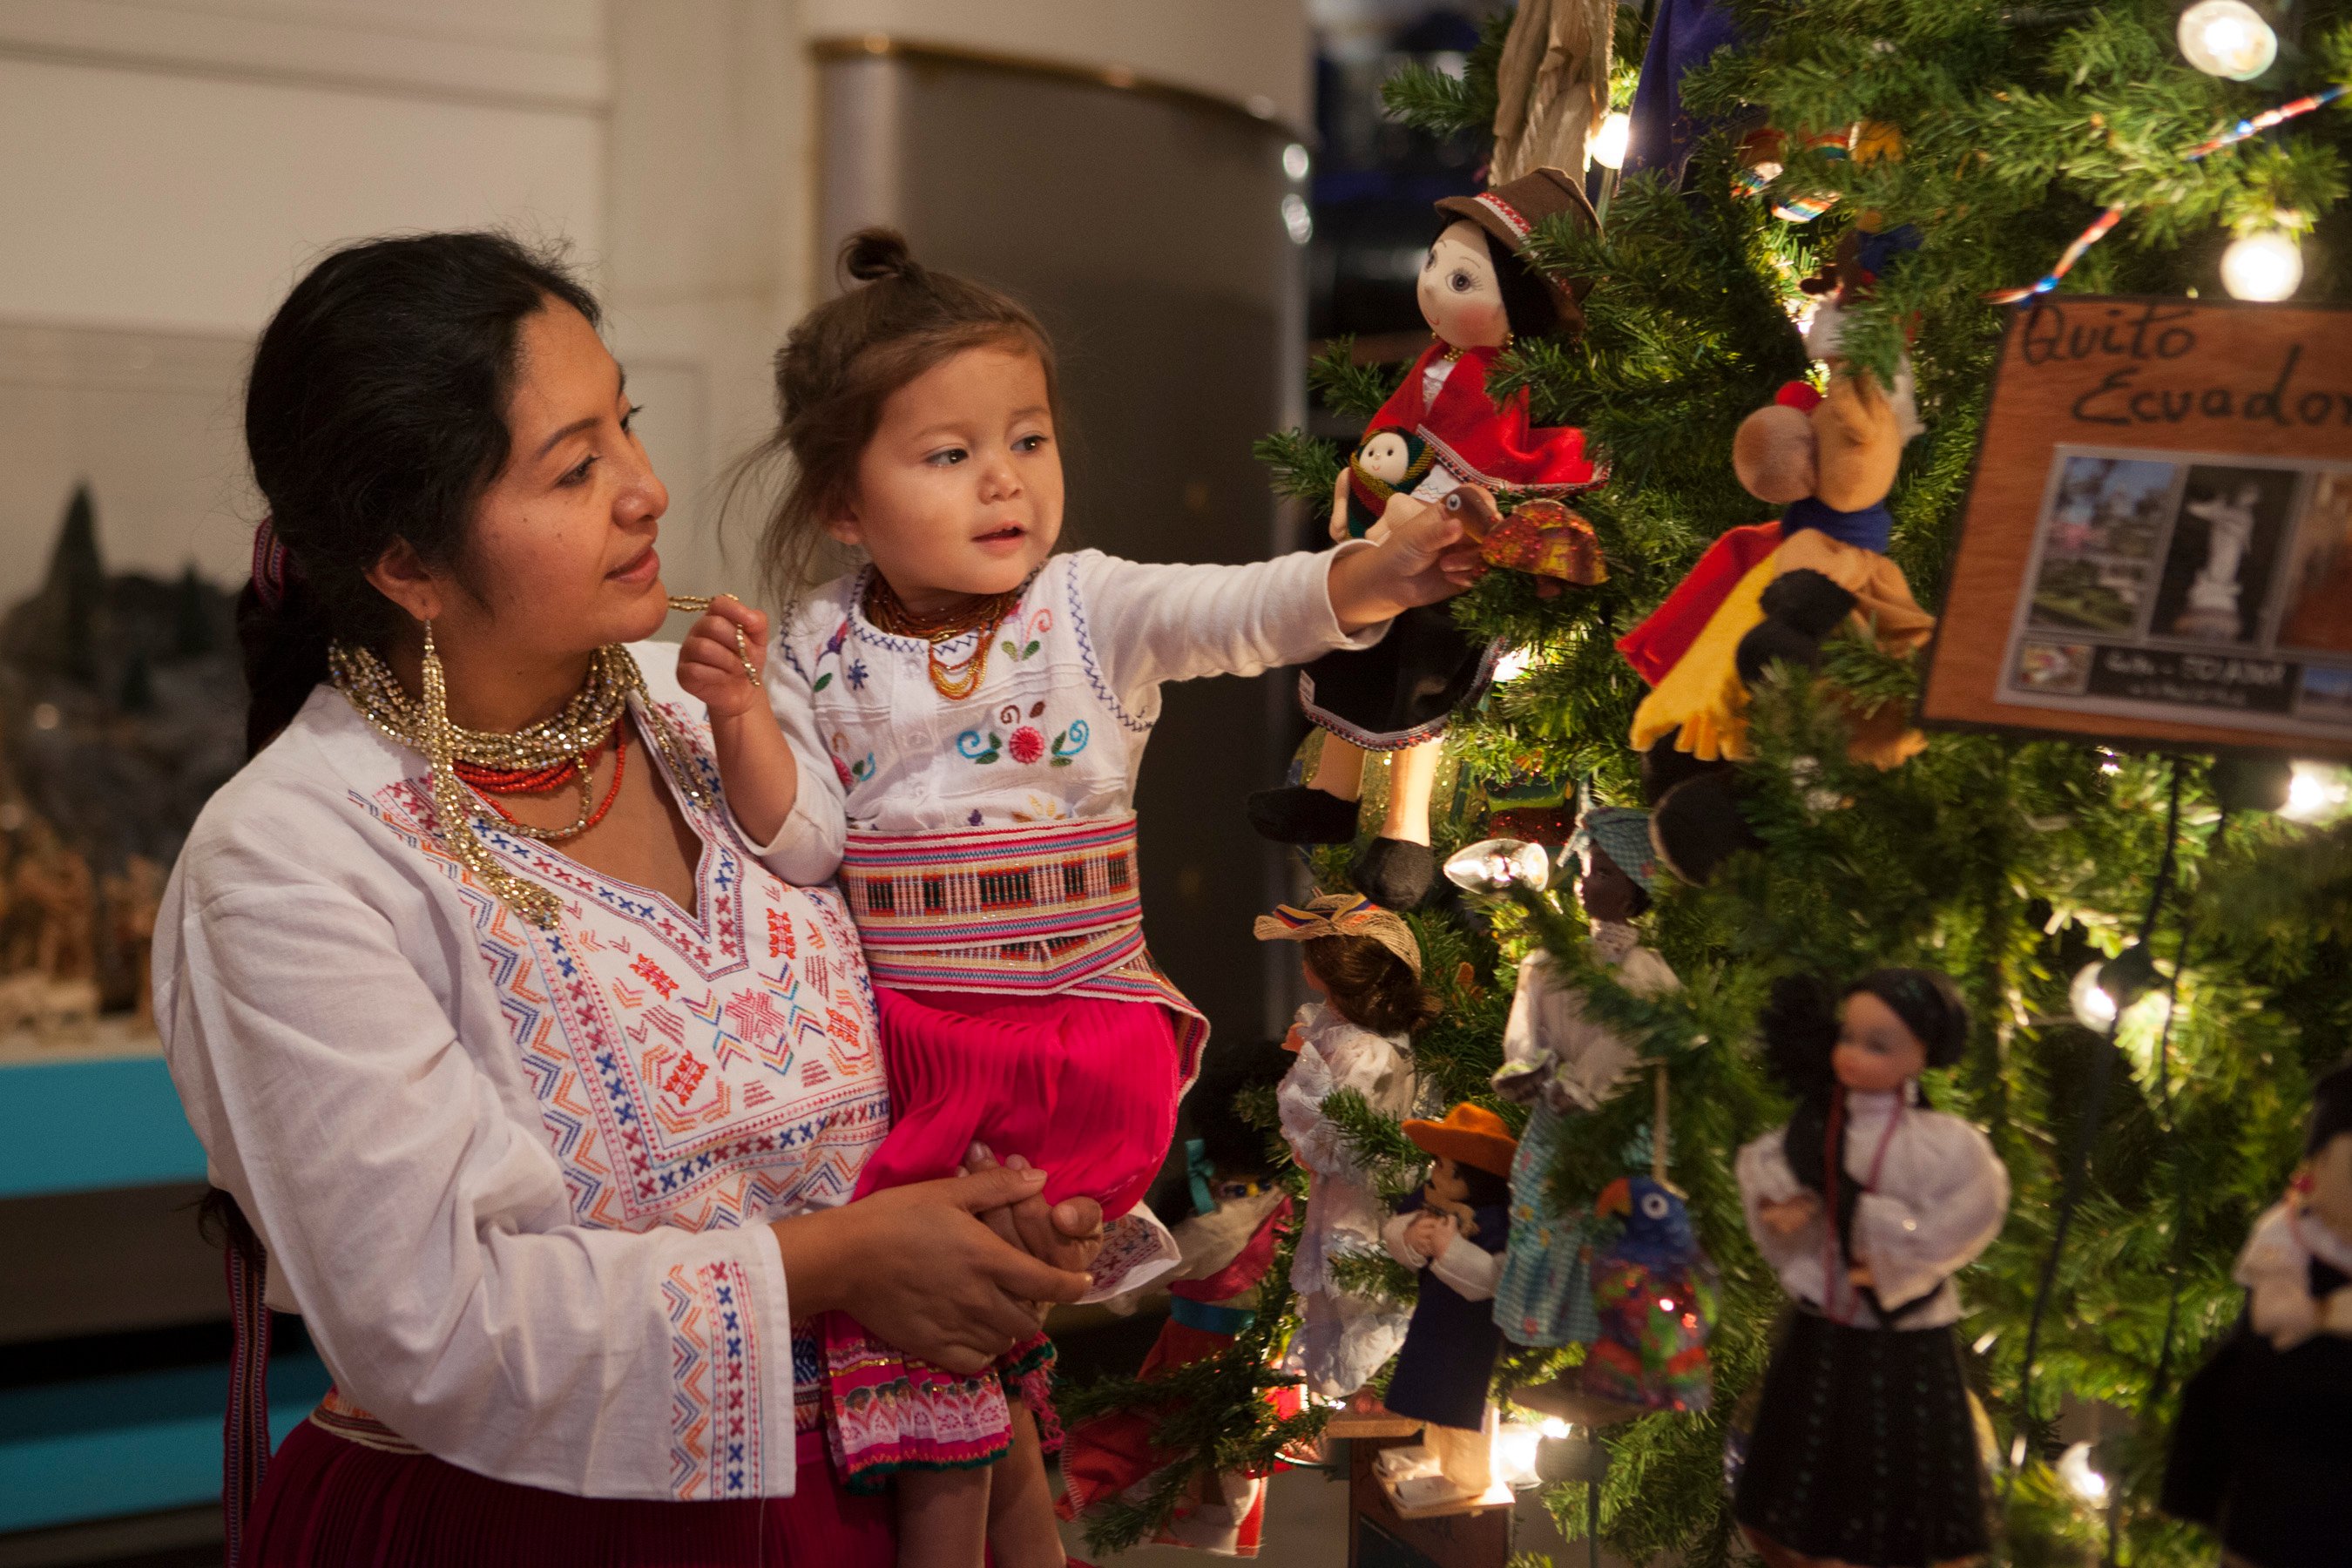 Volunteers, dressed in traditional Ecuadorian clothing, decorate the tree of Ecuador. (J.B. Spector, Museum of Science and Industry)